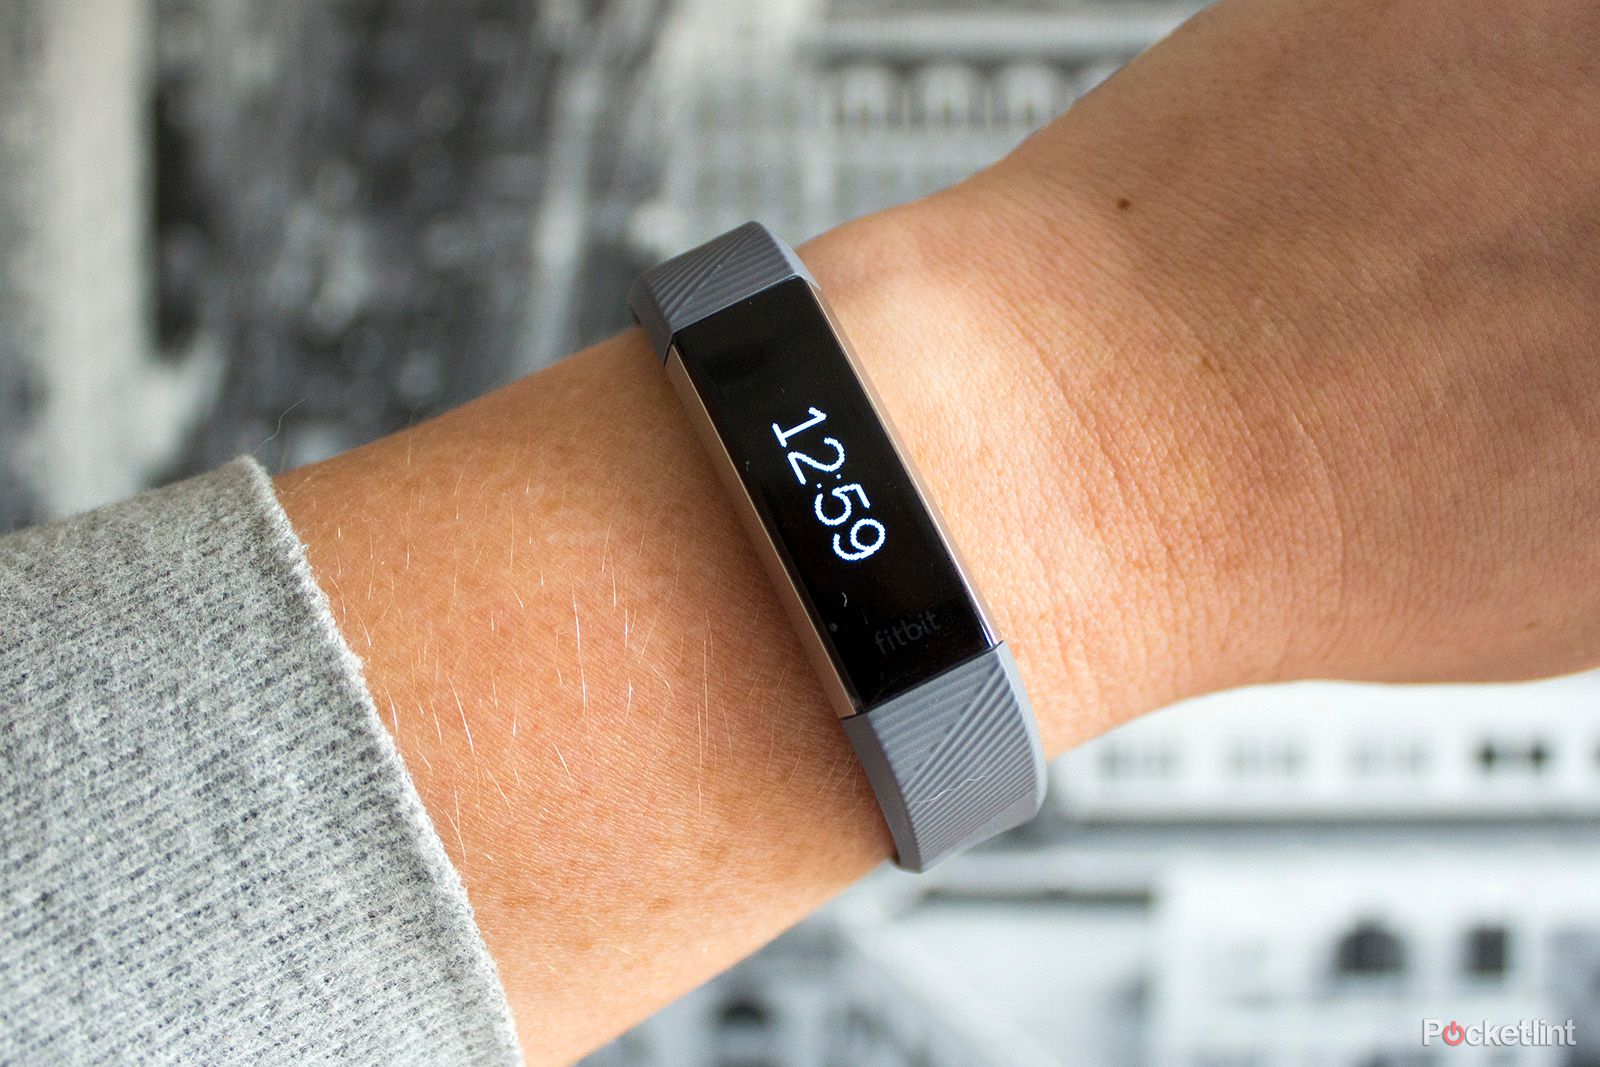 Alta HR The best everyday fitness tracker?